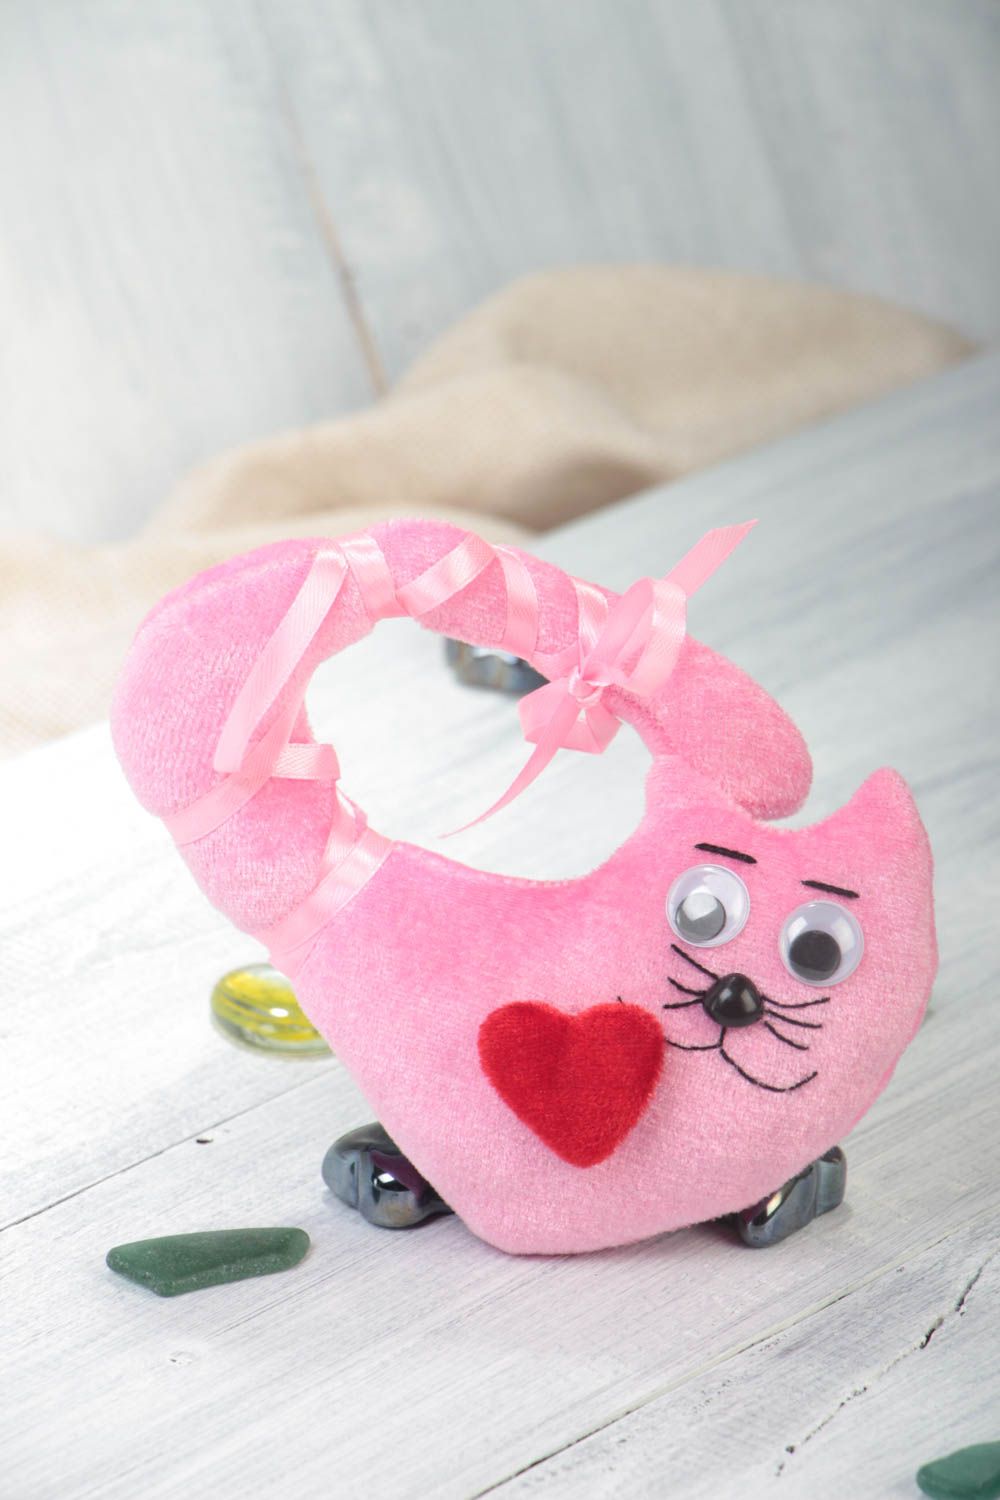 Childrens handmade soft toy collectible stuffed toy home design gift ideas photo 2